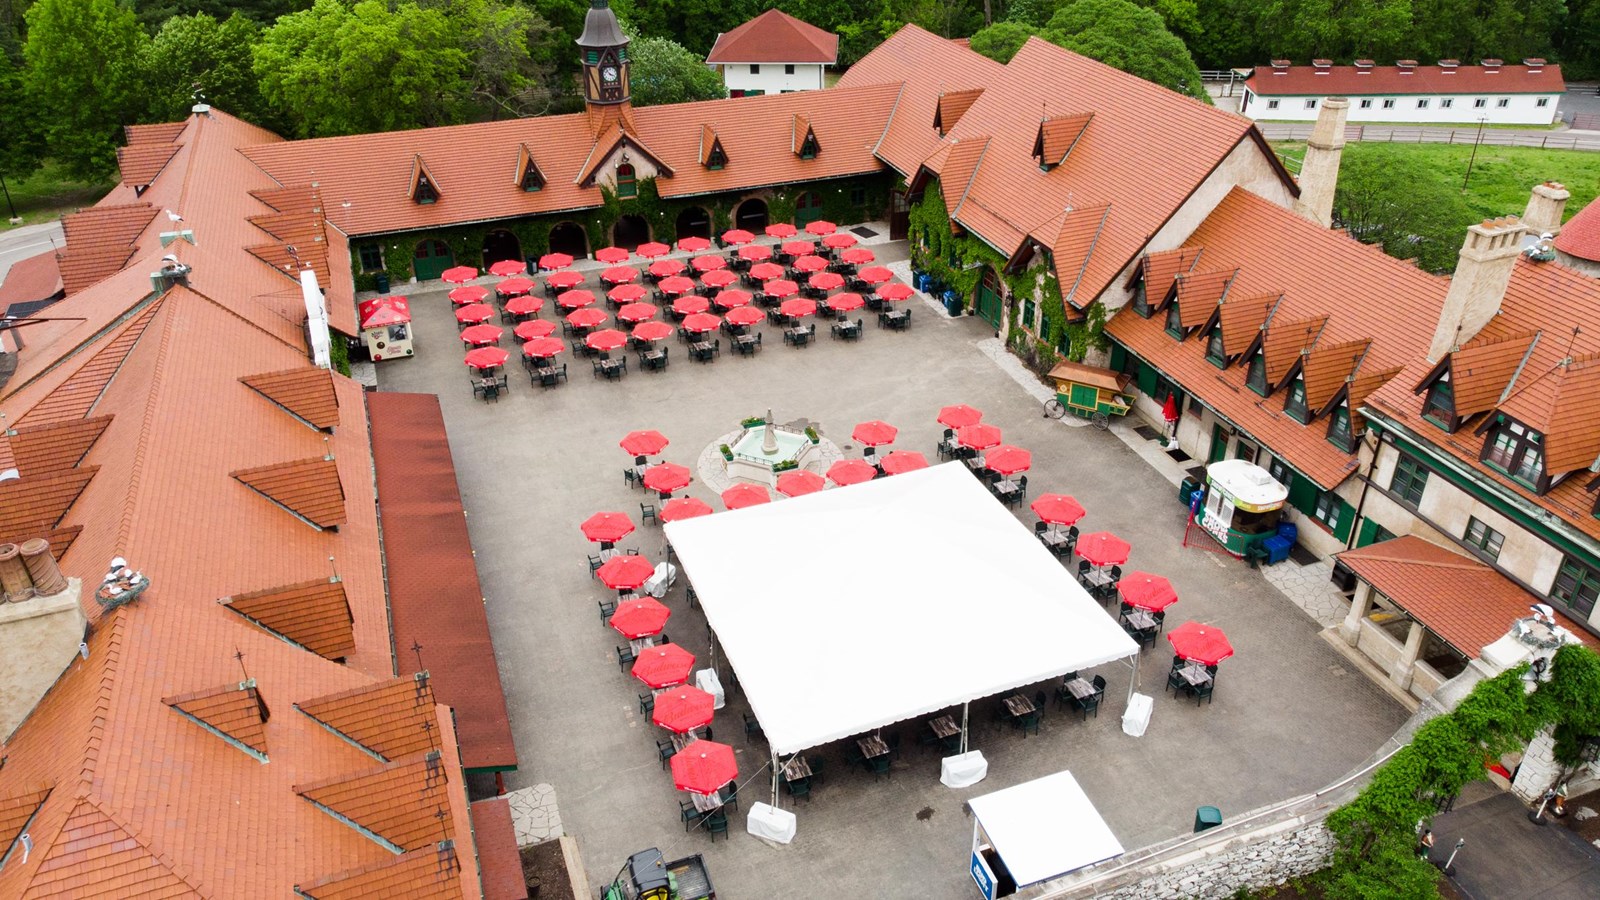 large courtyard with white pavilion, red umbrellas, and food & drink facilities with brown roofing. 